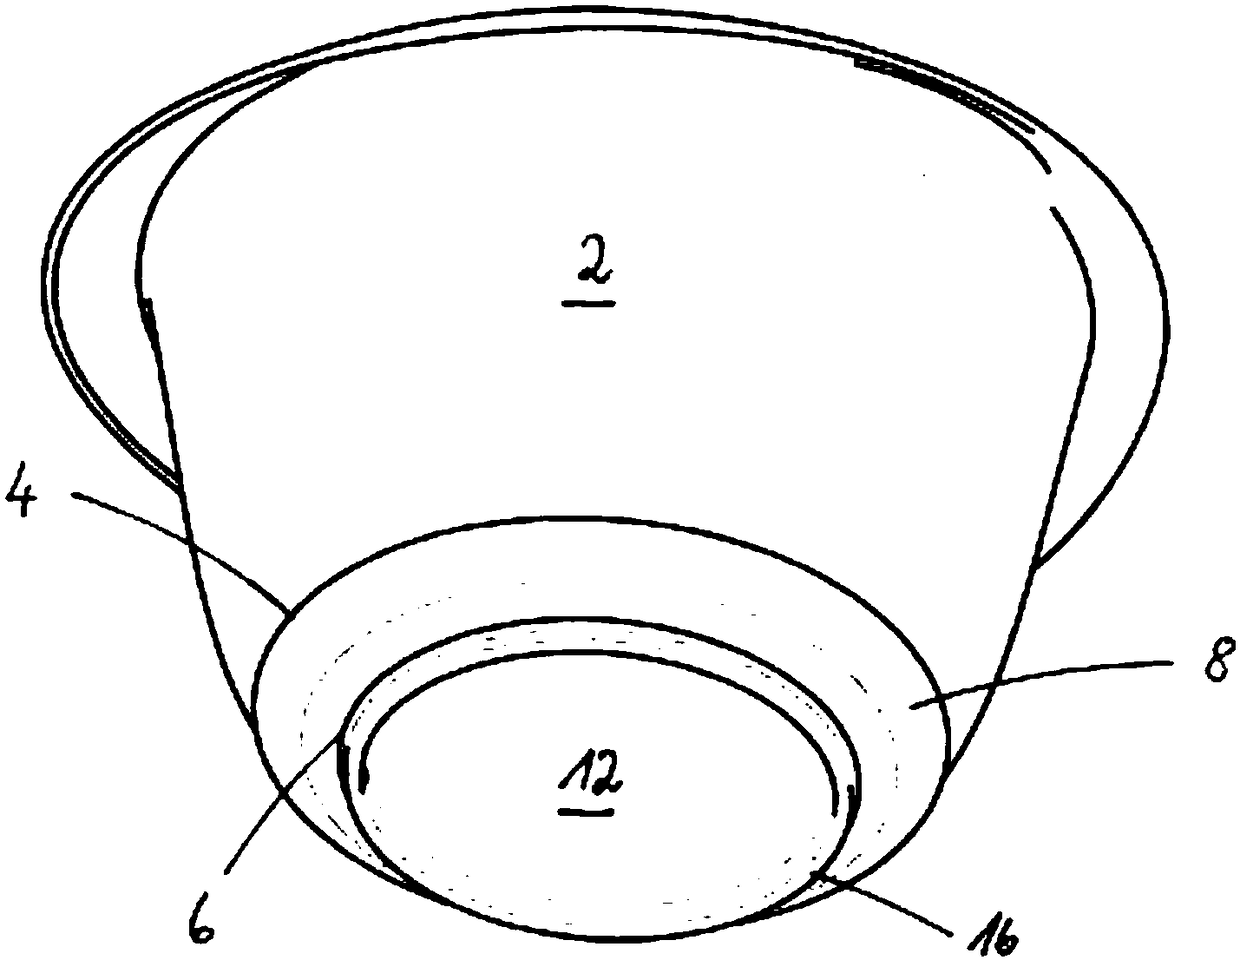 Mixing bowl having suction cup